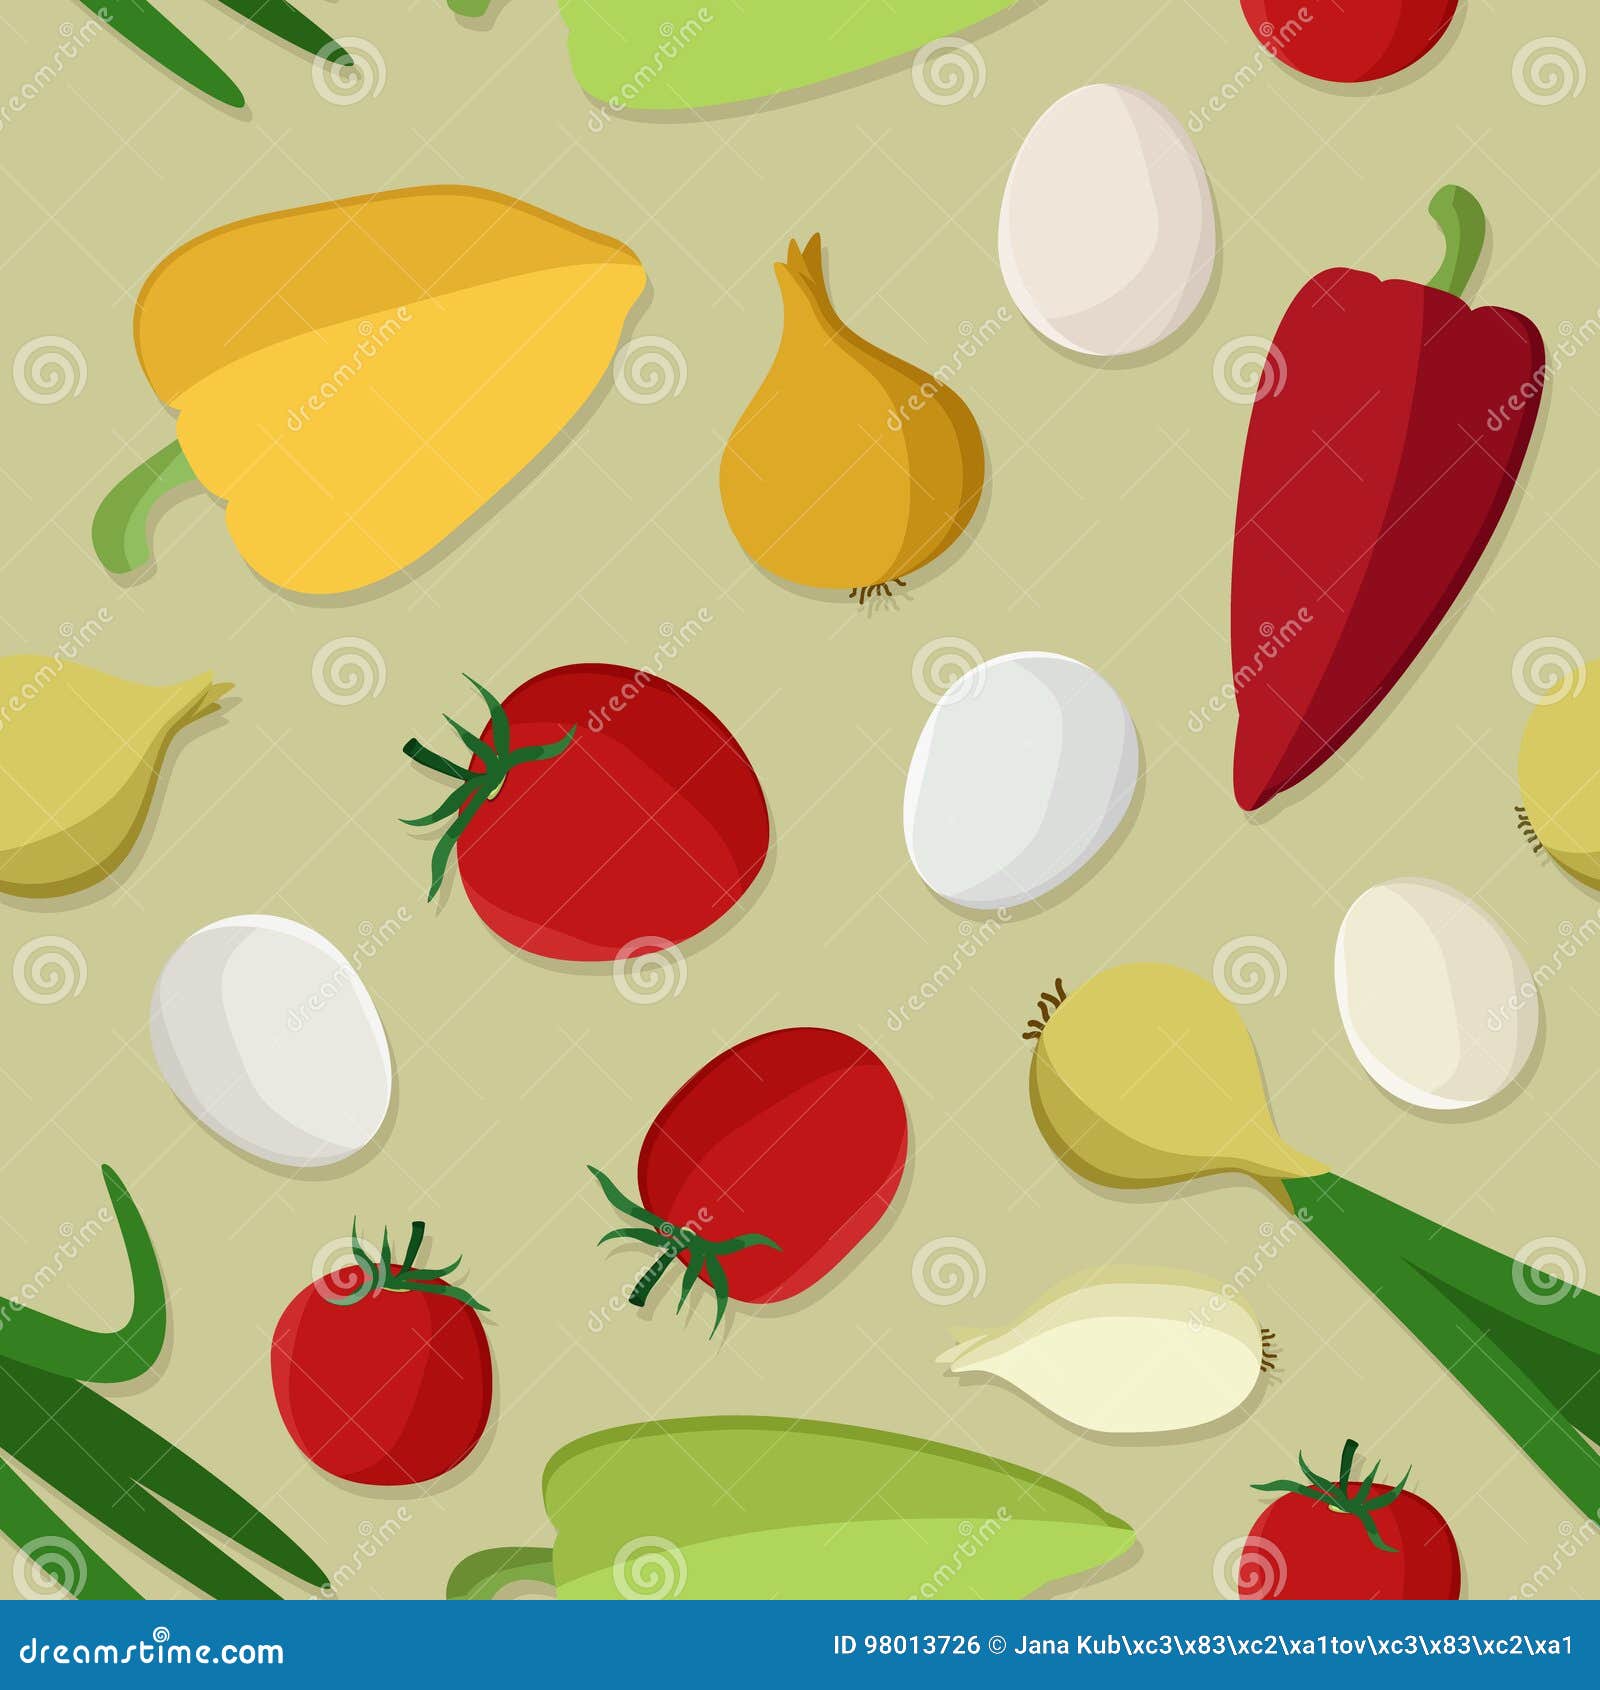 Vegetables and eggs. Peppers, tomatoes, onion and eggs - background